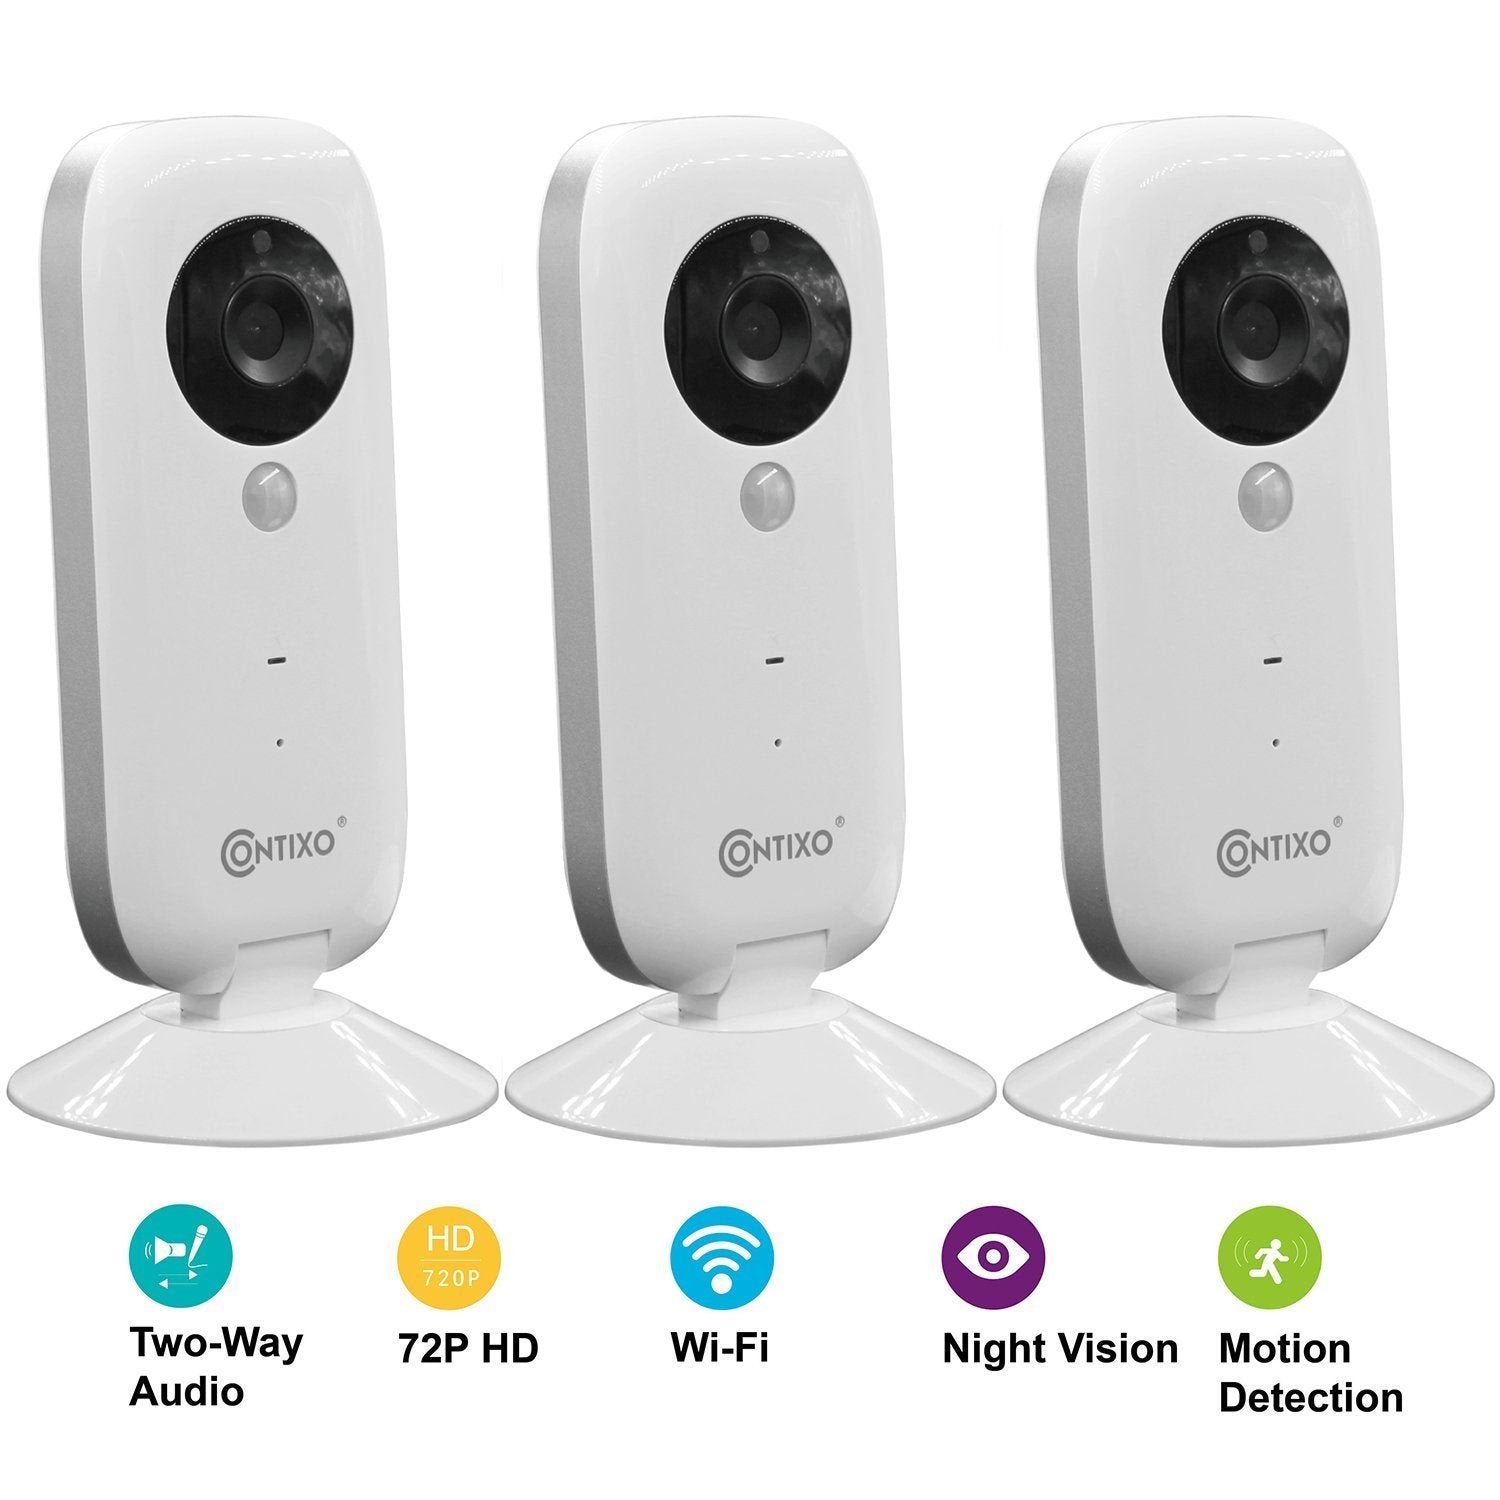 Contixo 720P HD WiFi Wireless Smart Home Video Security Camera with Two-Way Audio and Night Vision(3 pack, White)